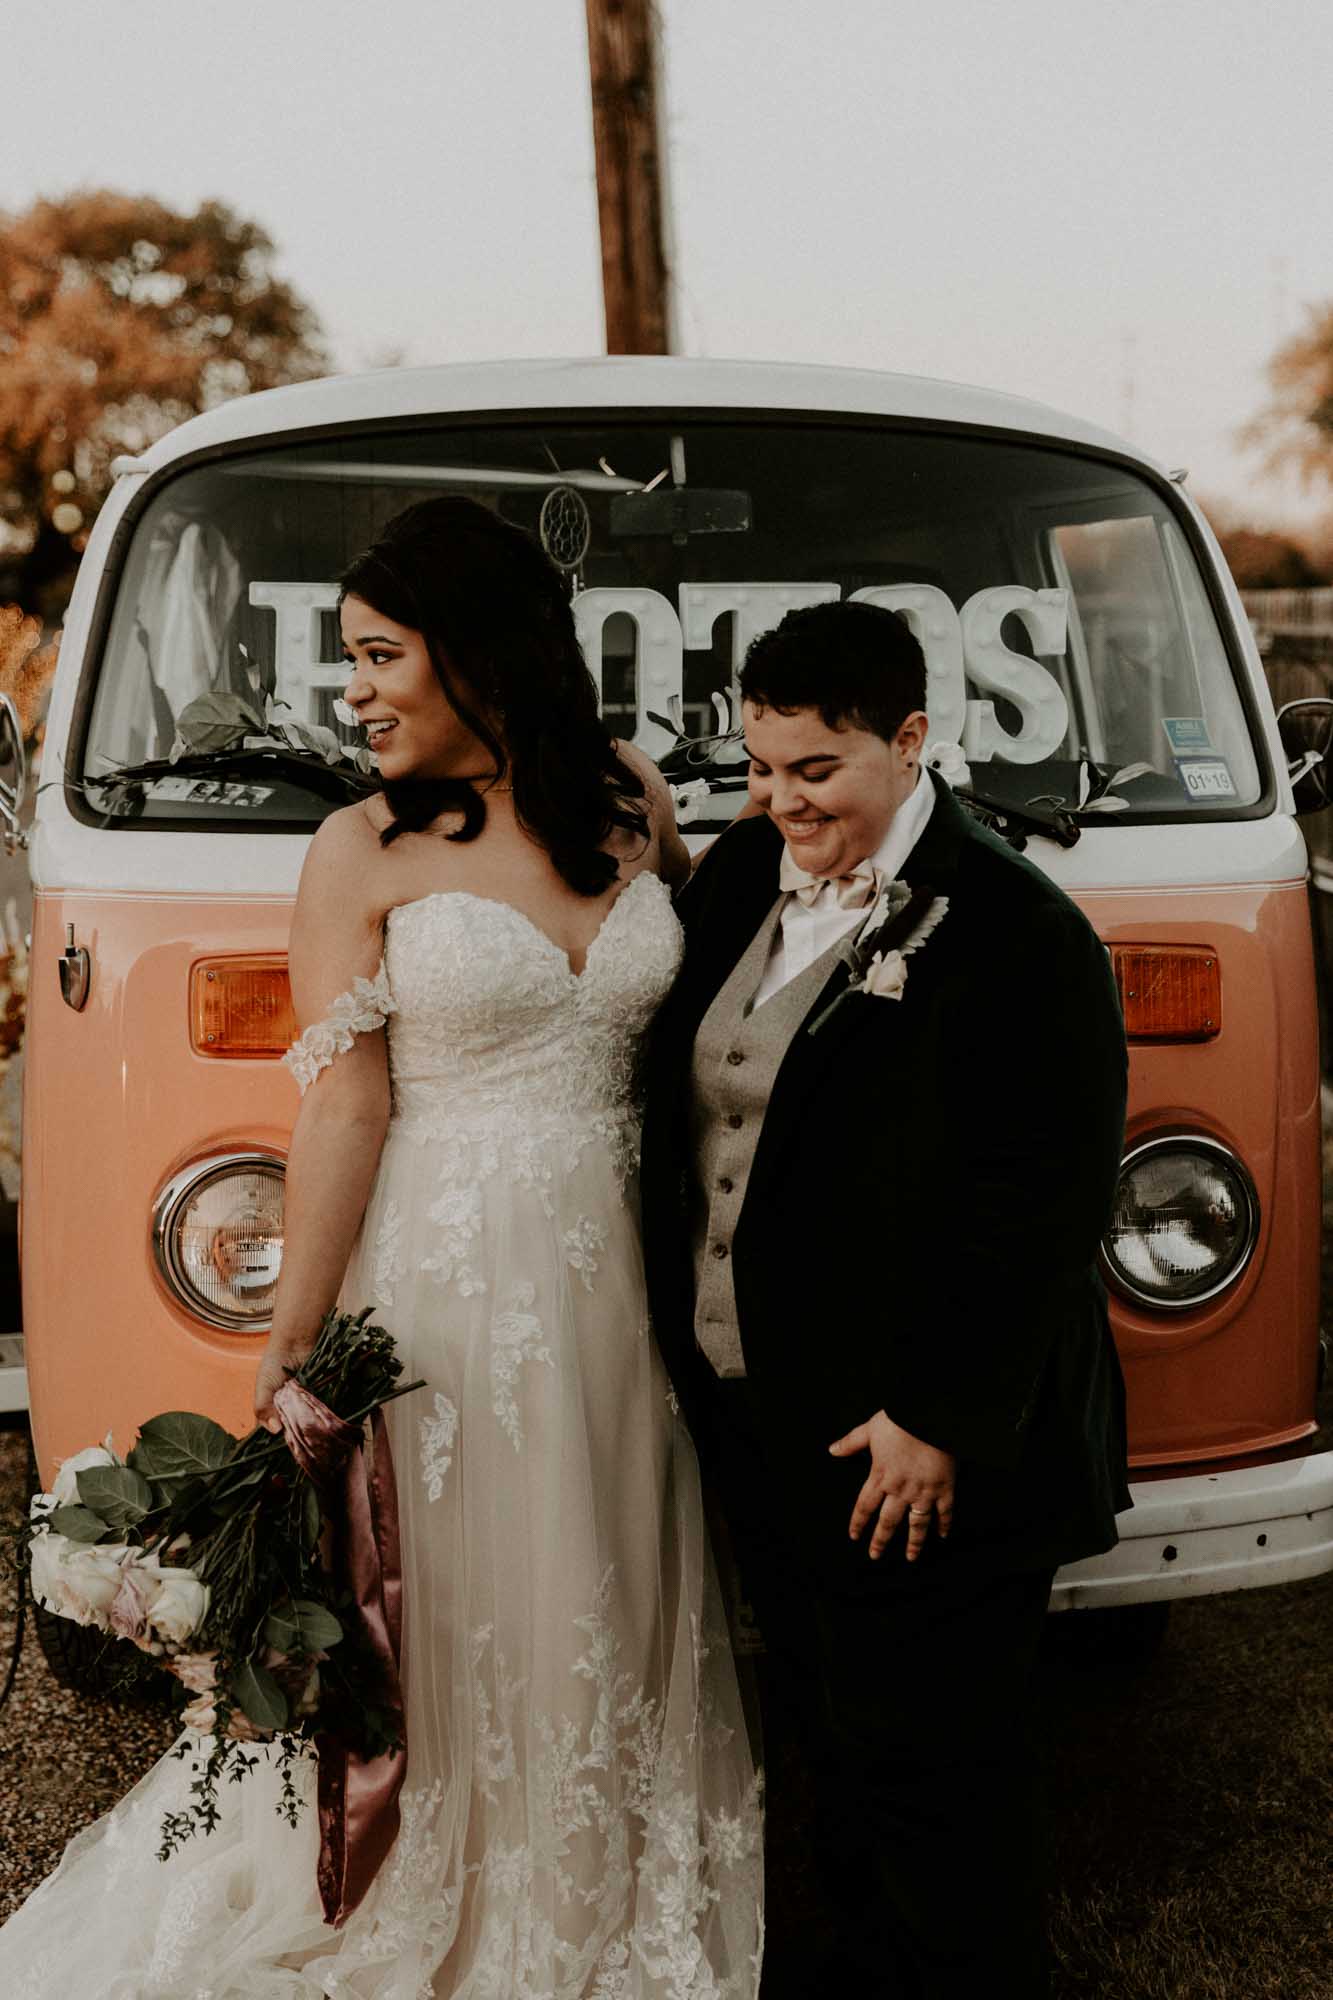 Dreamy Texas wedding with earthy decor and muted colored palette | The Tucks Photography | Featured on Equally Wed, the leading LGBTQ+ wedding magazine